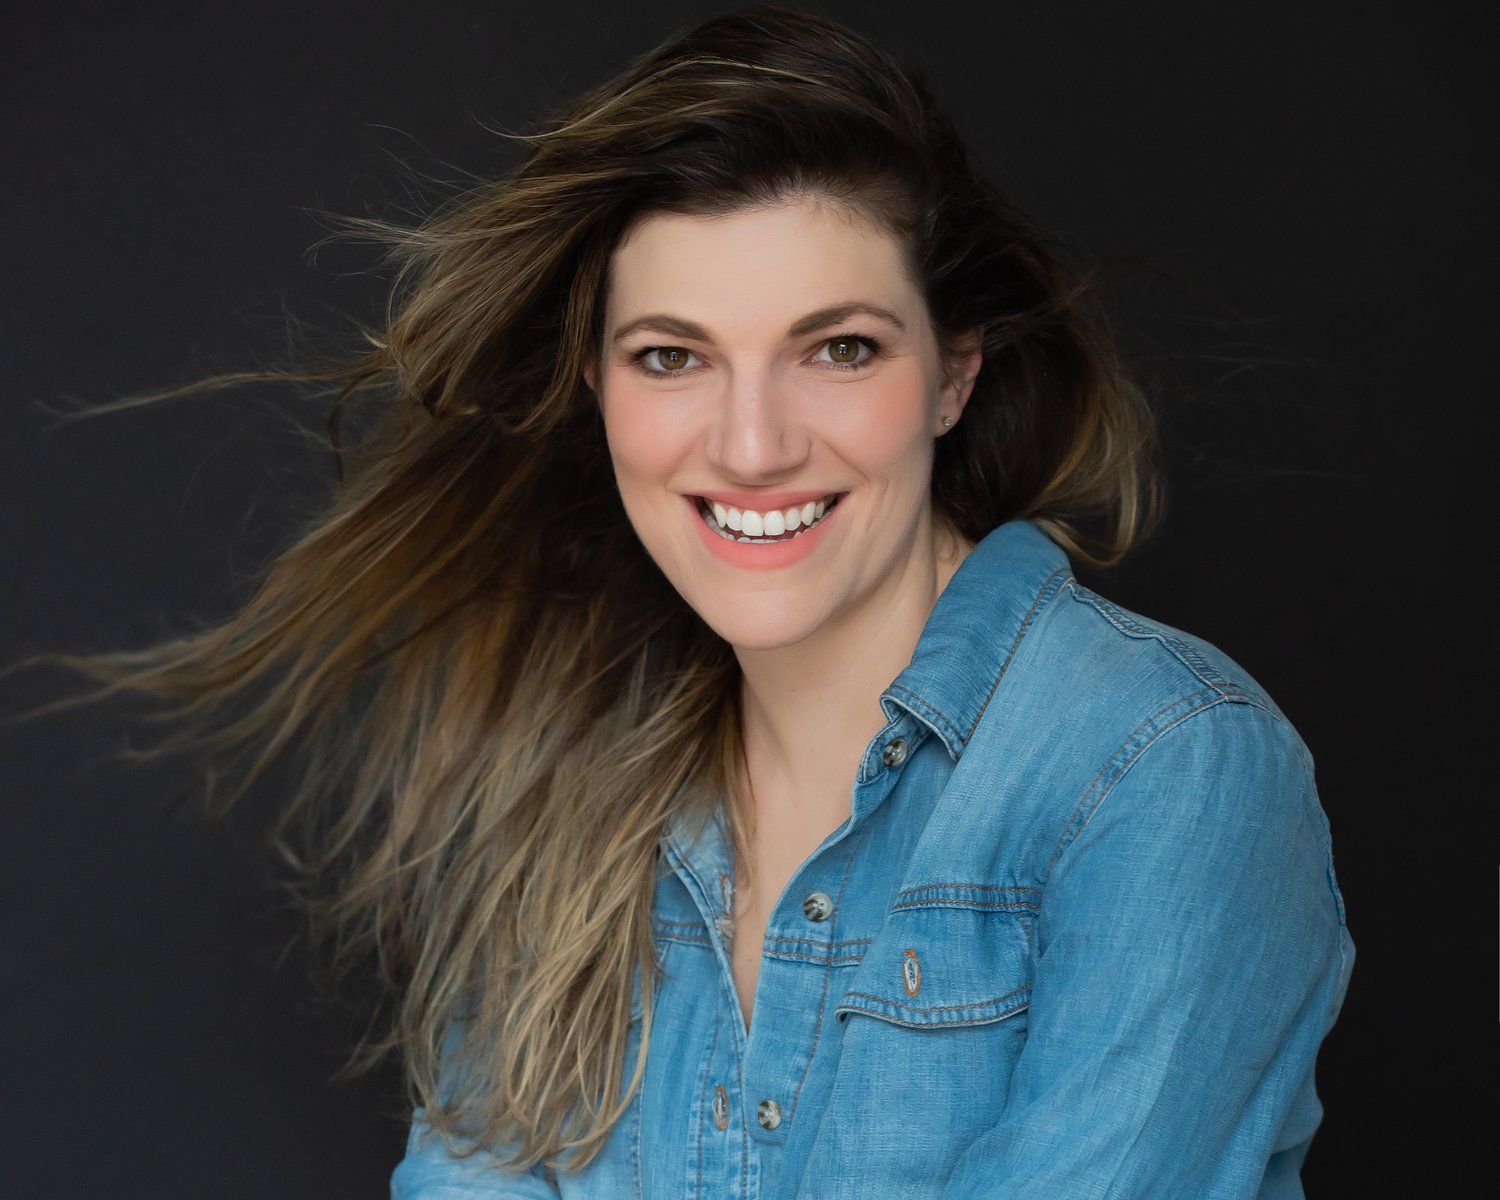 Professional Portrait Photography | Stacey Naglie Toronto  | Smiling woman in blue top in front of dark wall